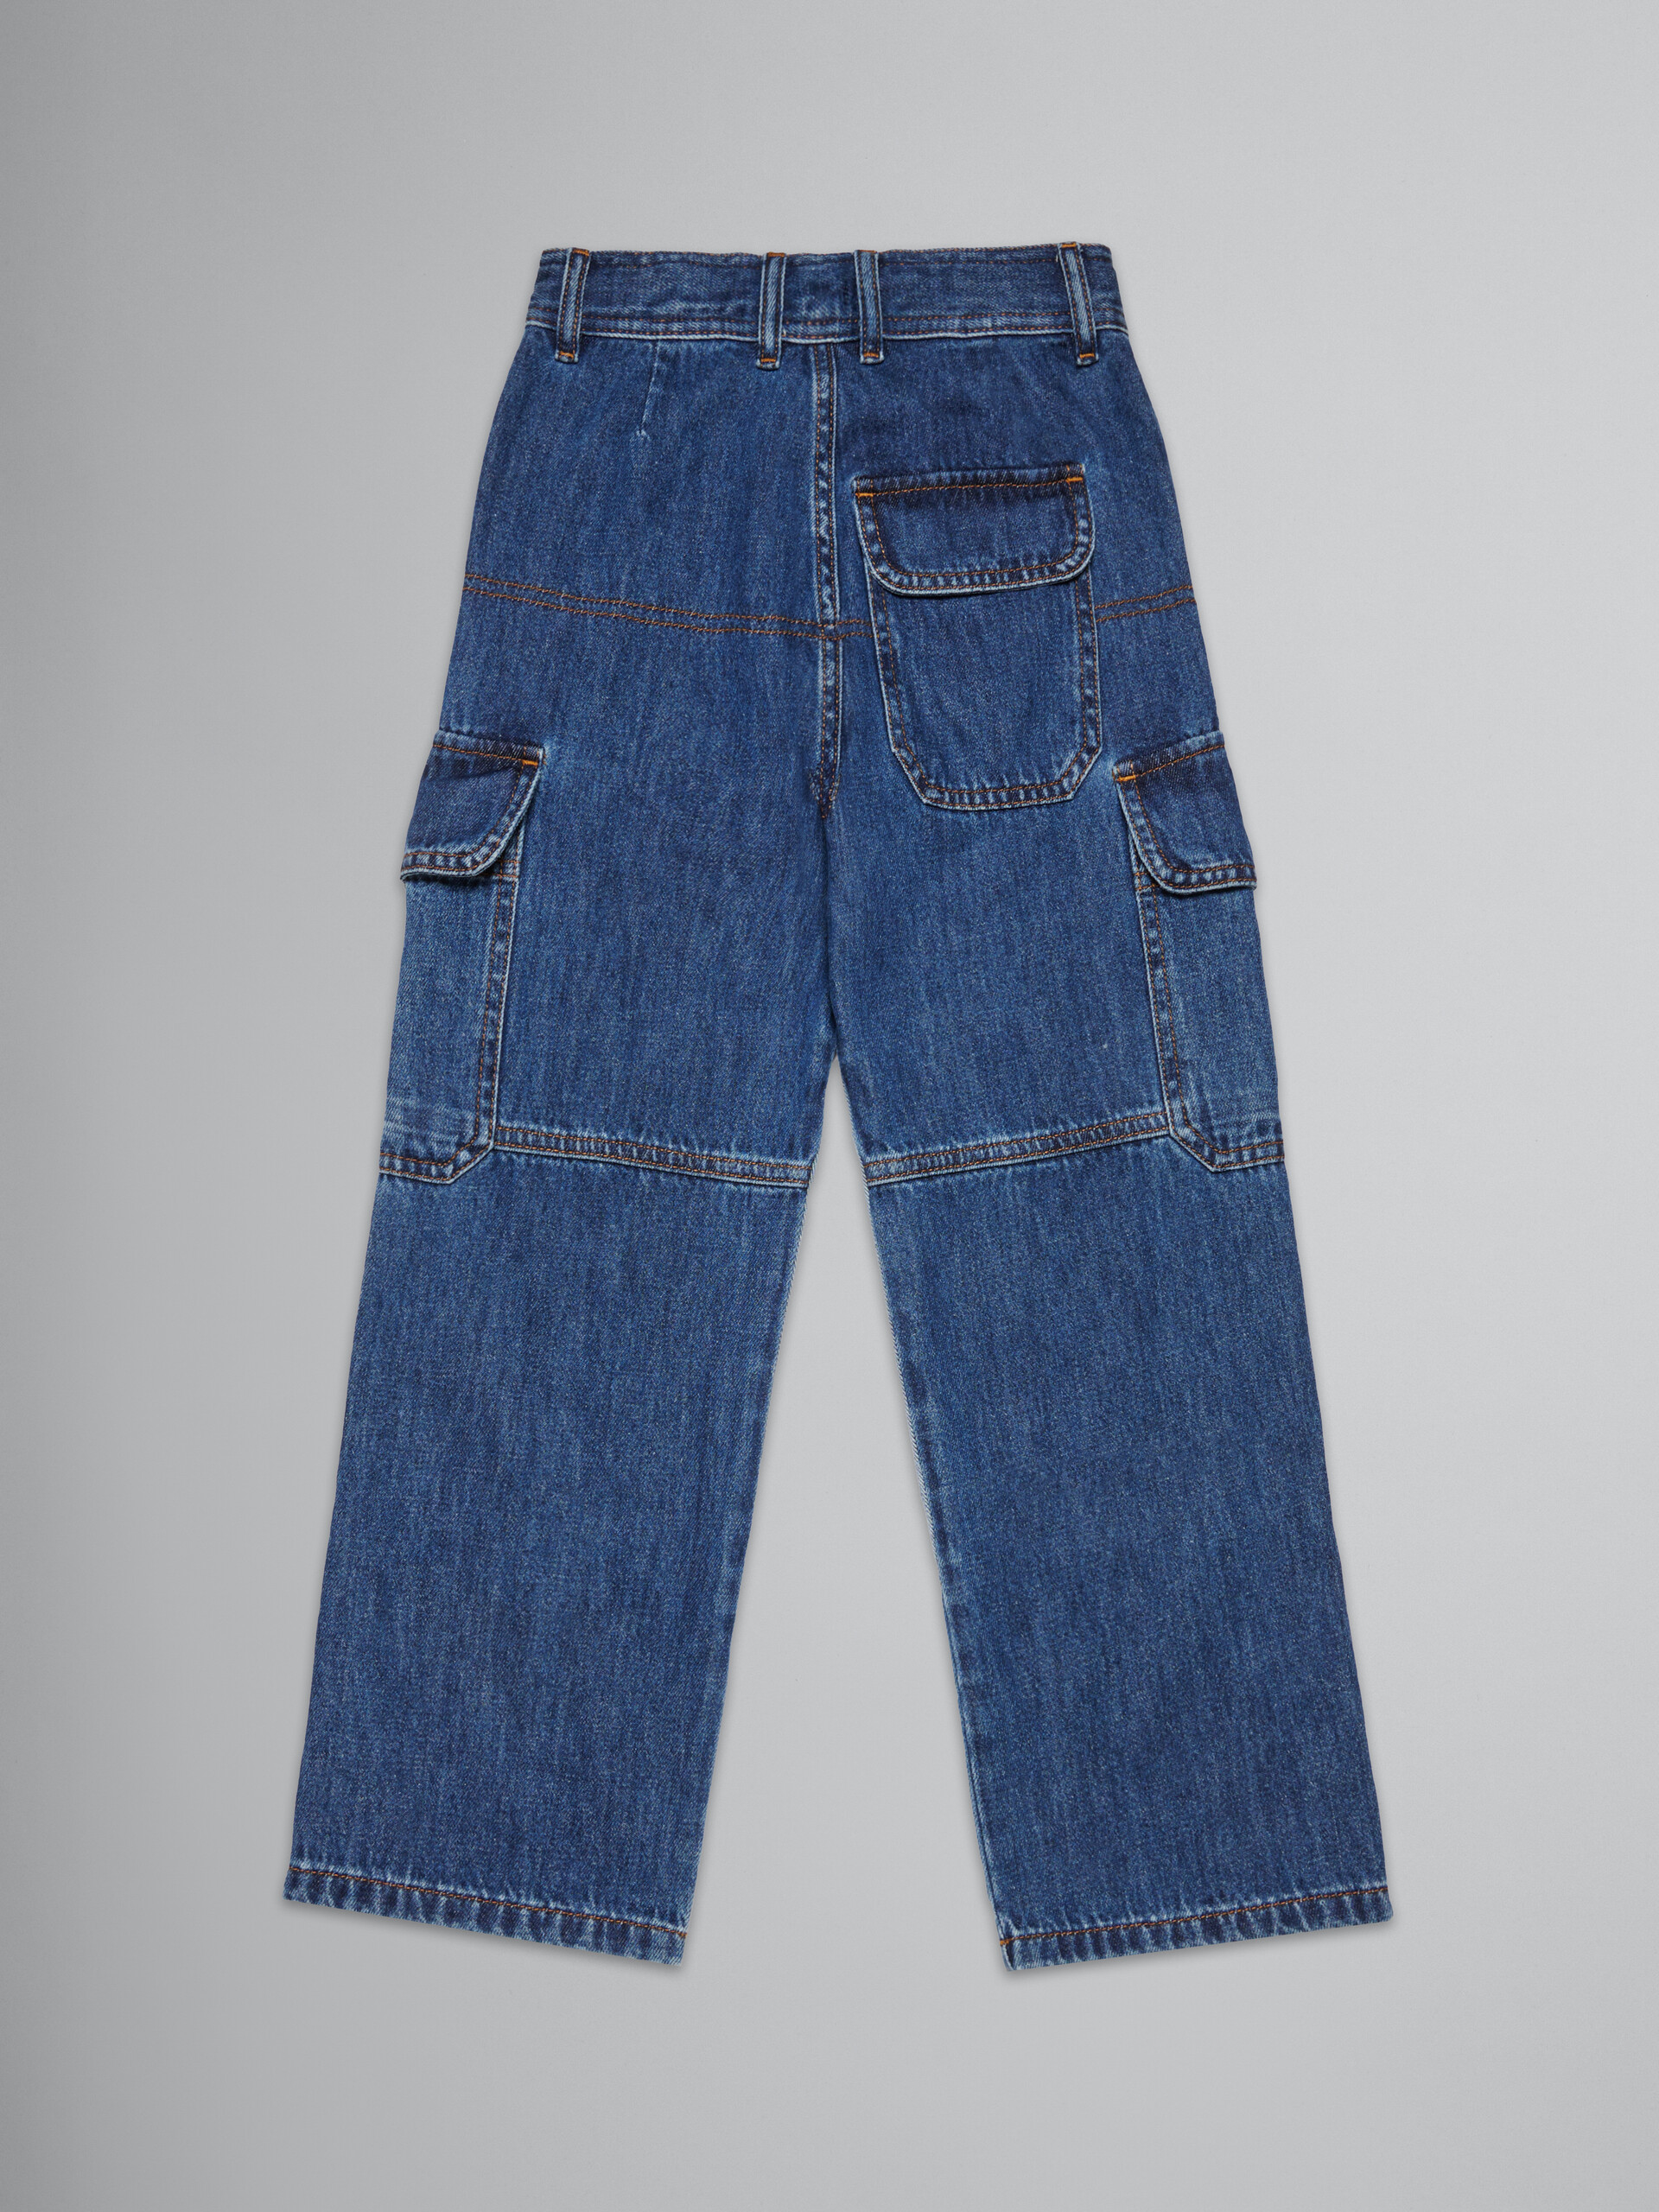 Two-color cargo jeans - Pants - Image 2